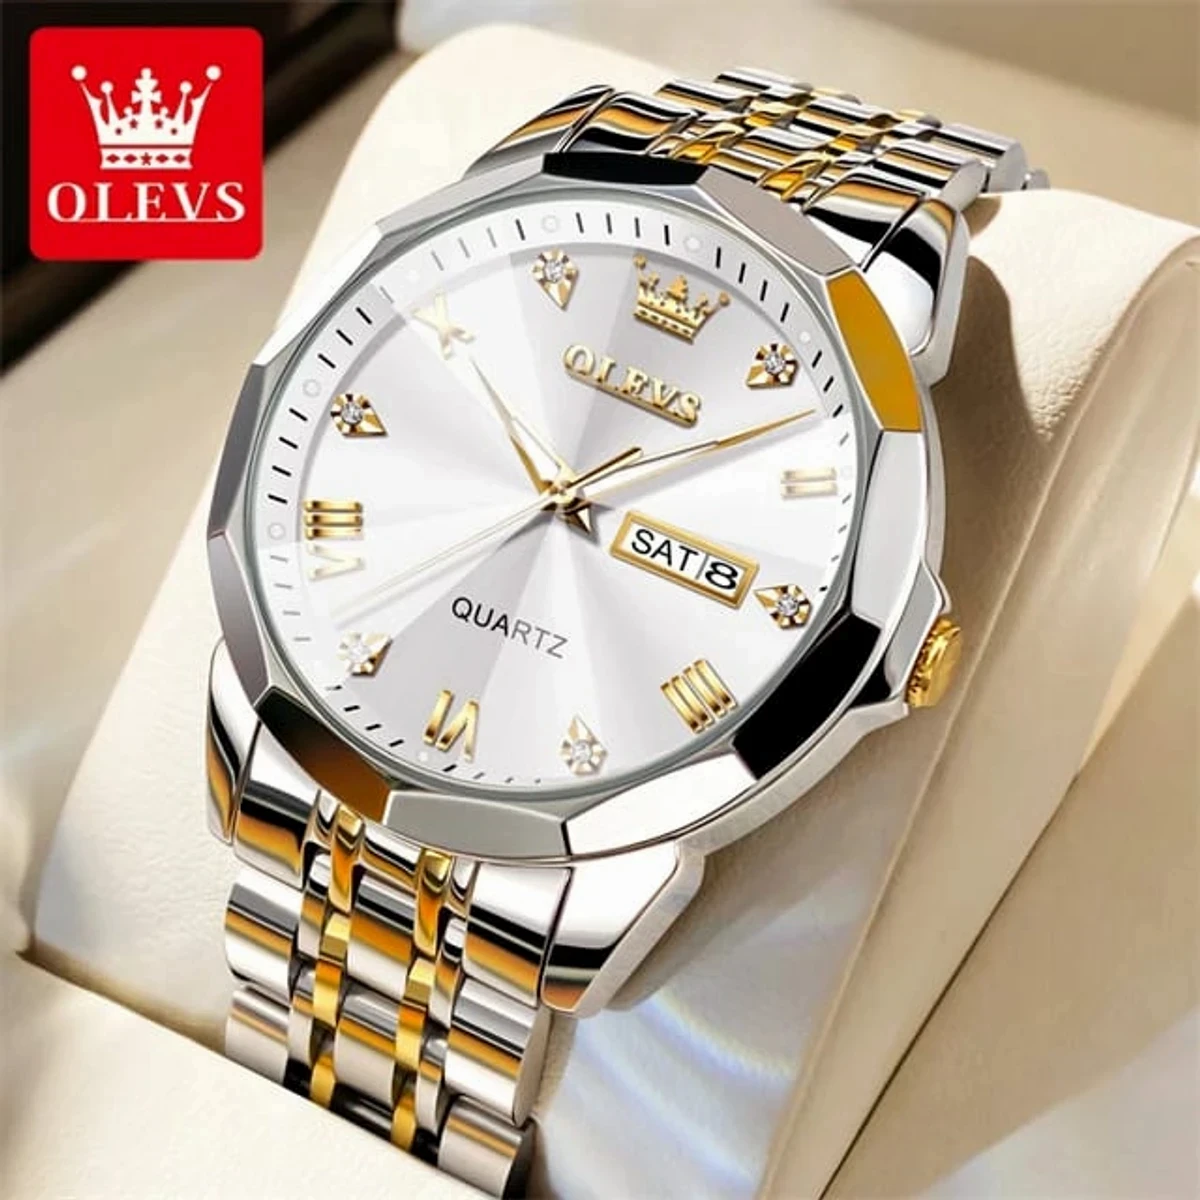 OLEVS MODEL 9931 Watch for Men Stainless Steel Watches - 9941 TOTON AR DIAL WHITE - MAN WATCH